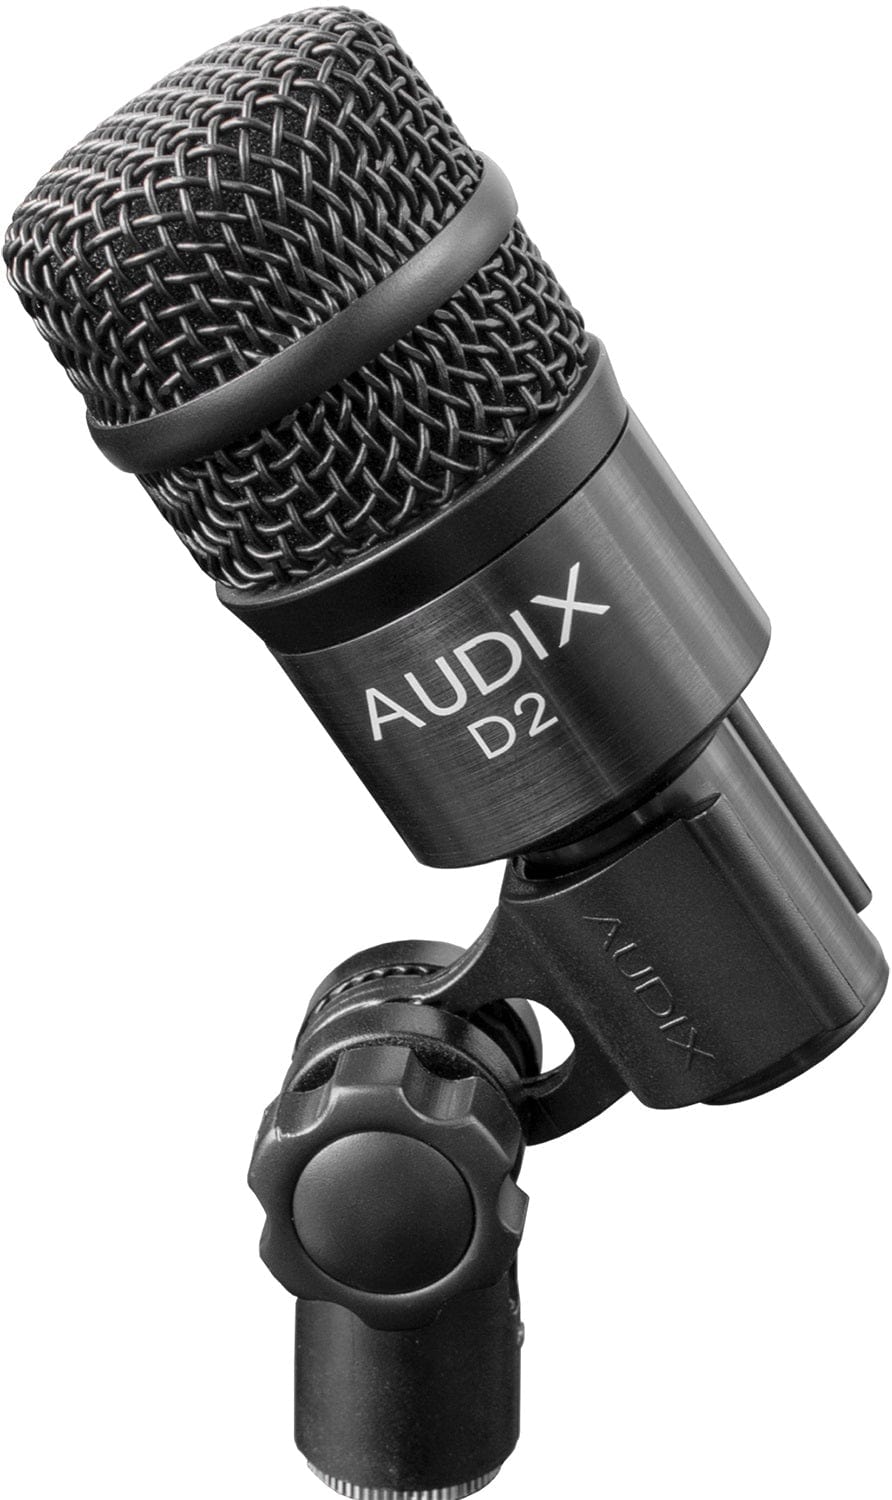 Audix D2 Hypercardioid Dynamic Microphone - PSSL ProSound and Stage Lighting